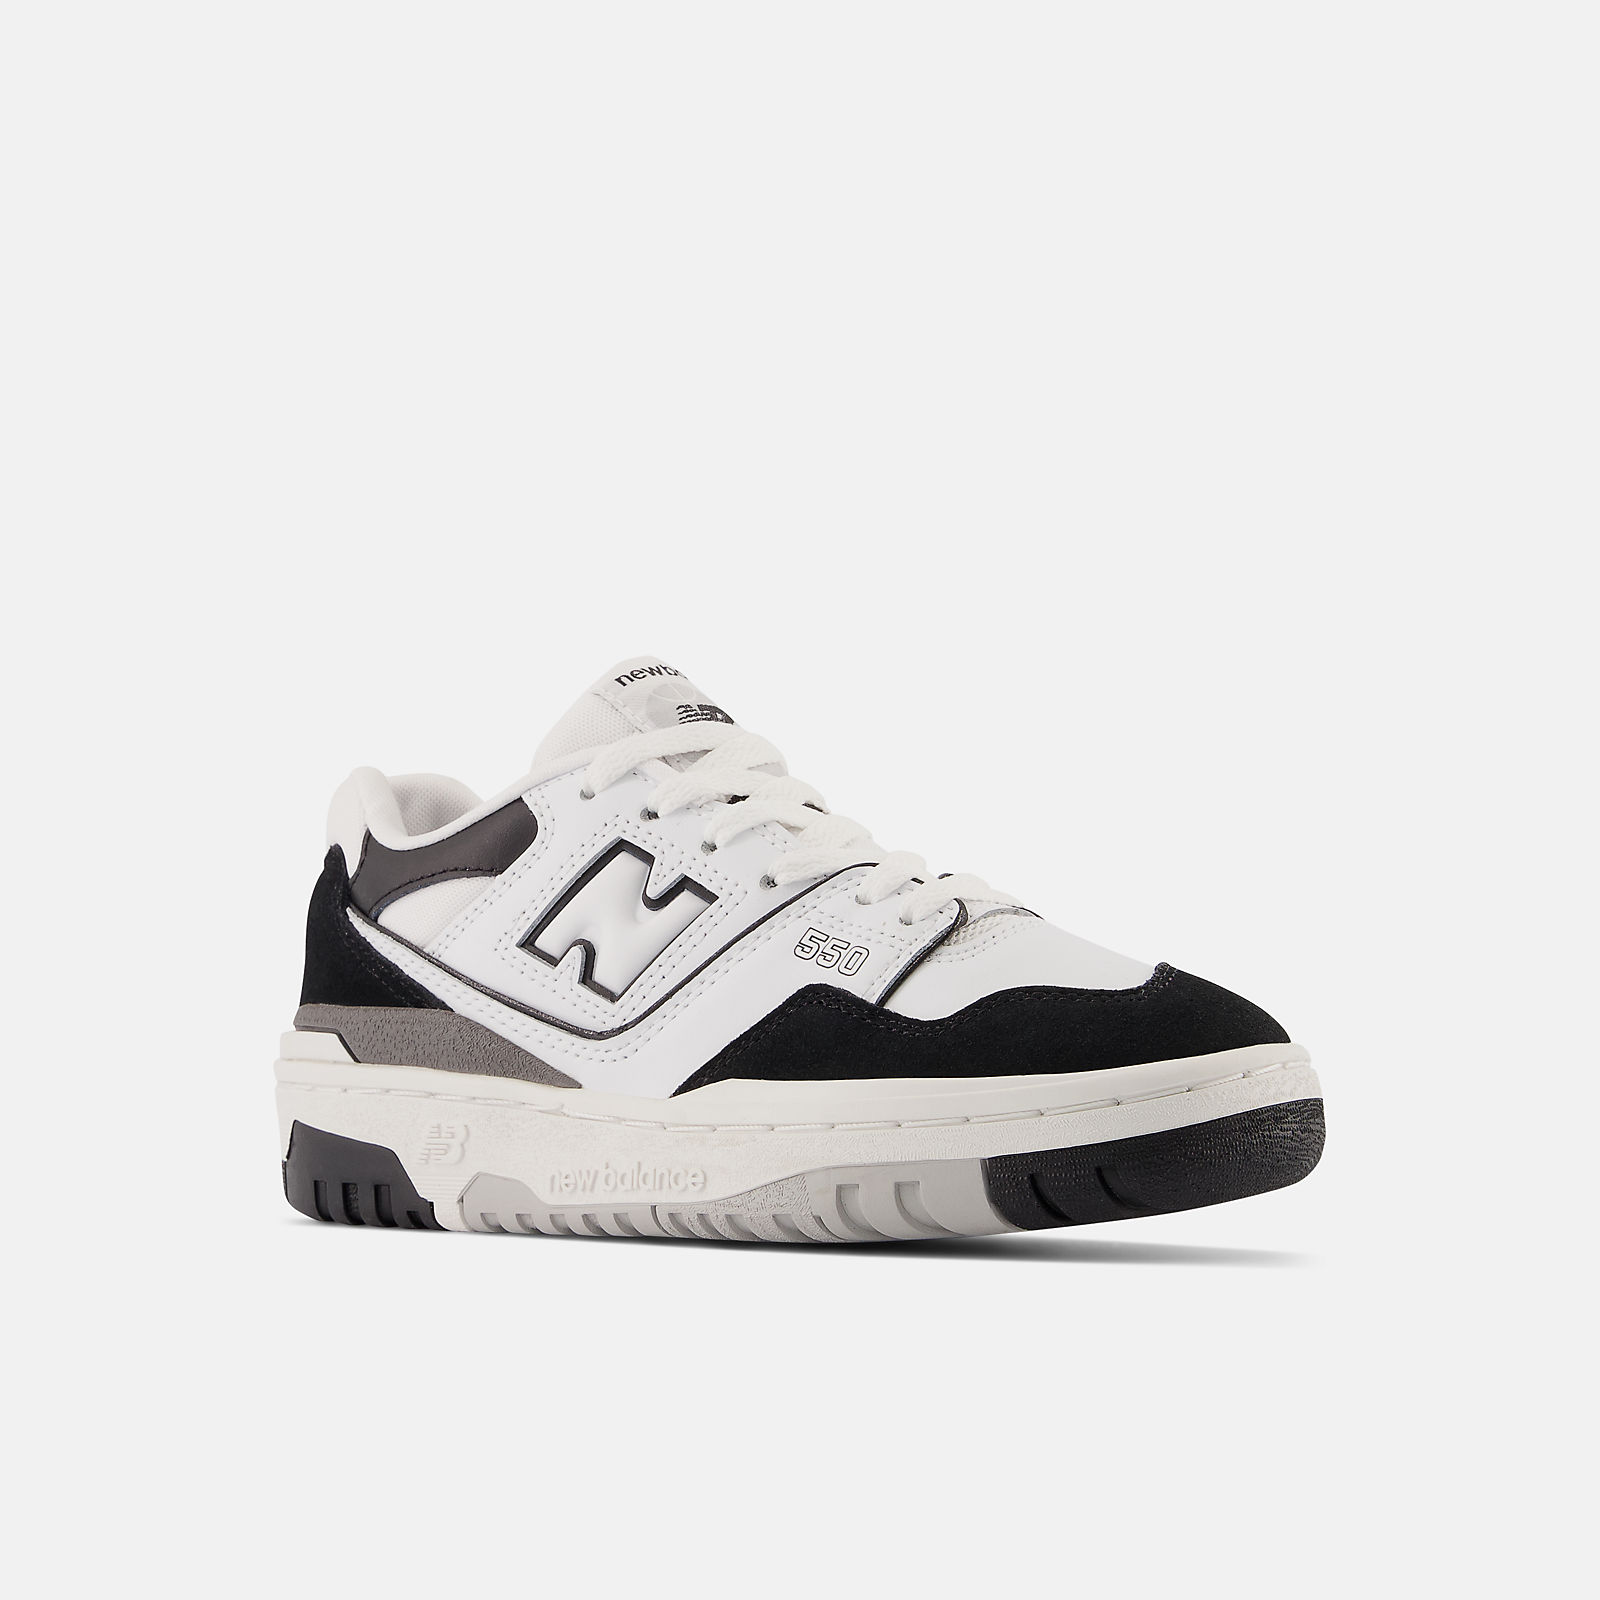 Better on foot of these - ALD New Balance 550 : r/Sneakers